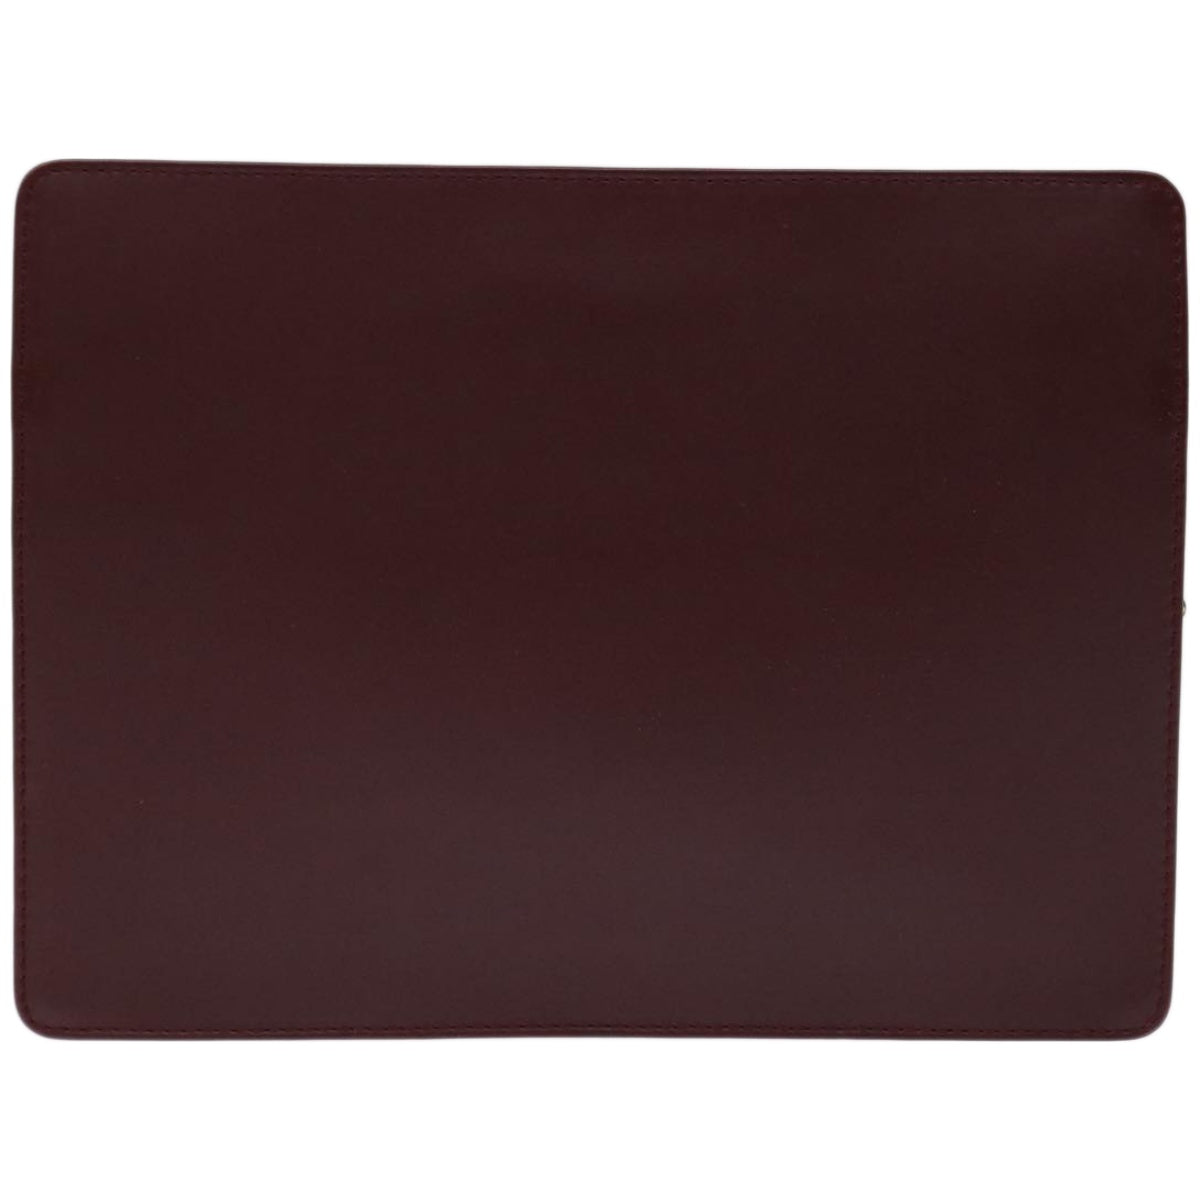 CARTIER Clutch Bag Leather Wine Red Auth 68226 - 0